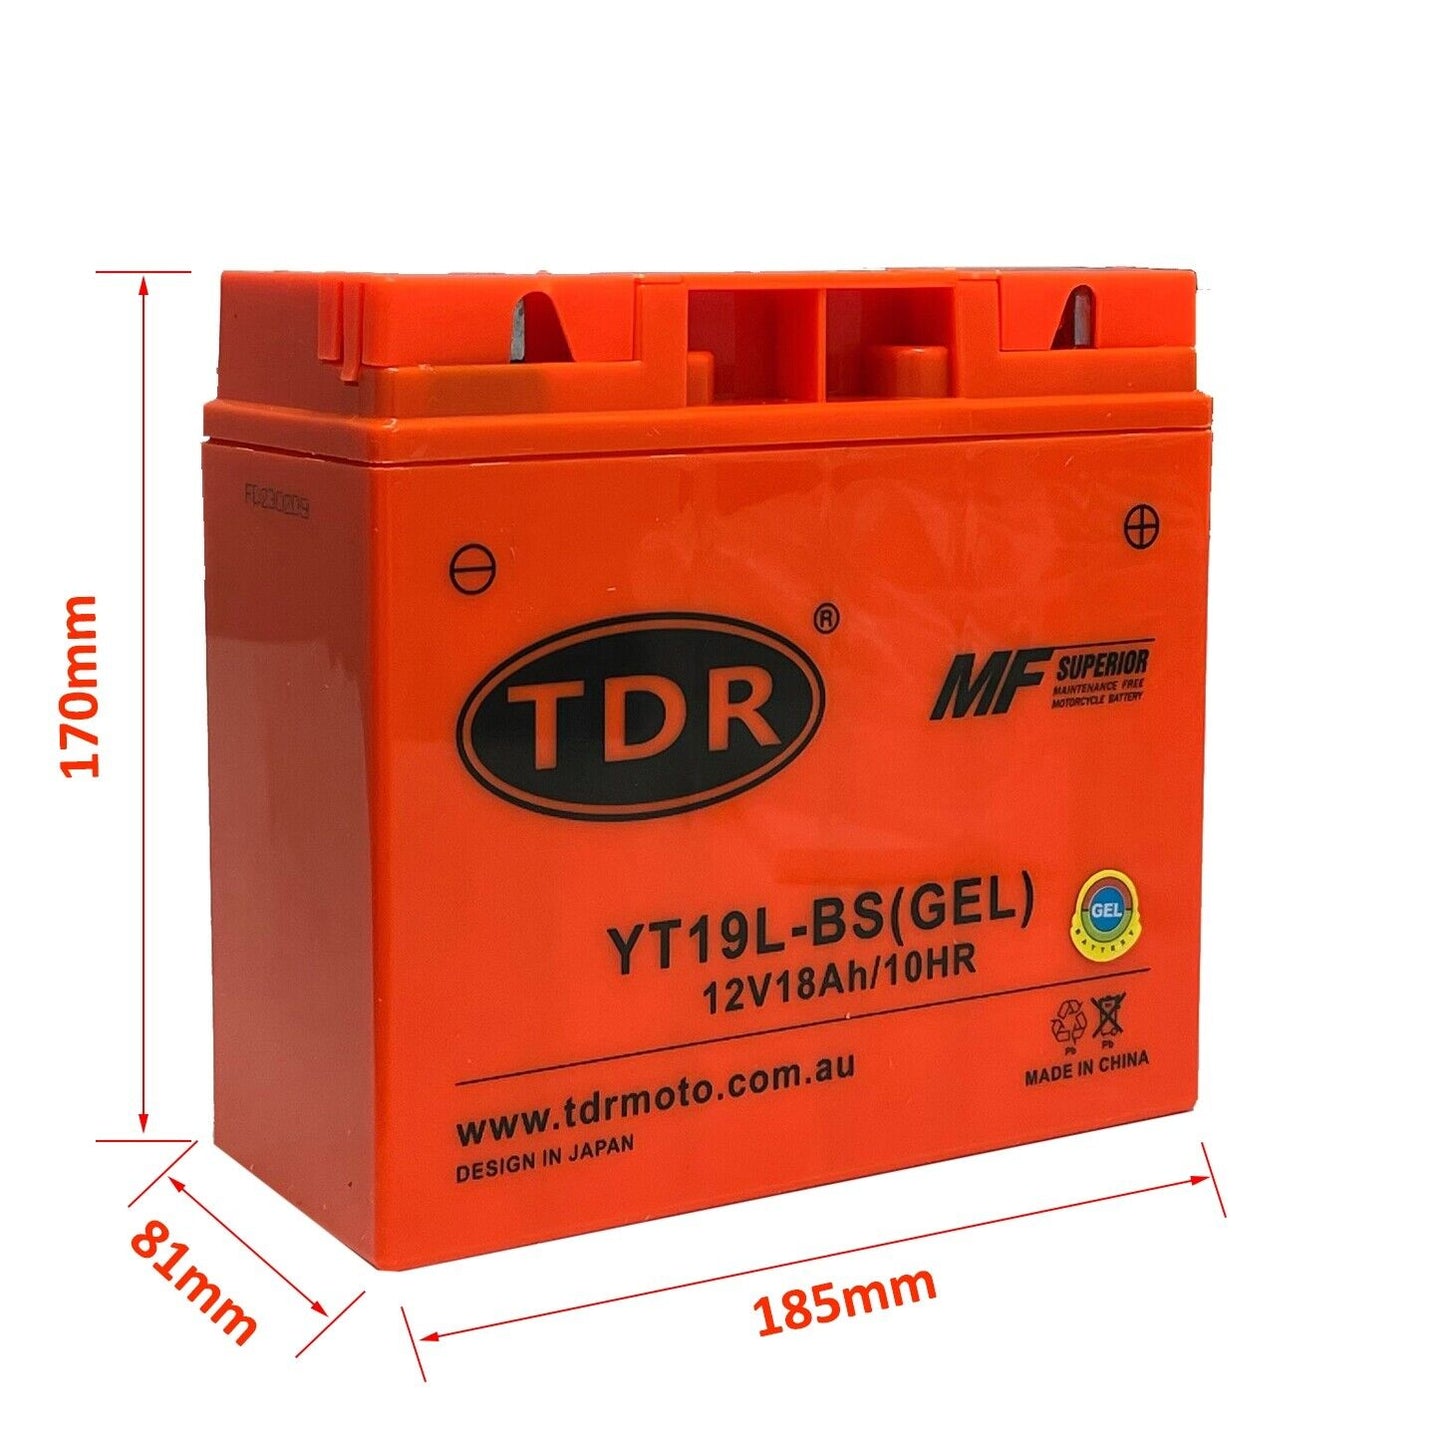 YT19BL-BS 12V 18Ah Motorcycle Battery For BMW R1150R RS RT K1100LT R1100GS R1100RS